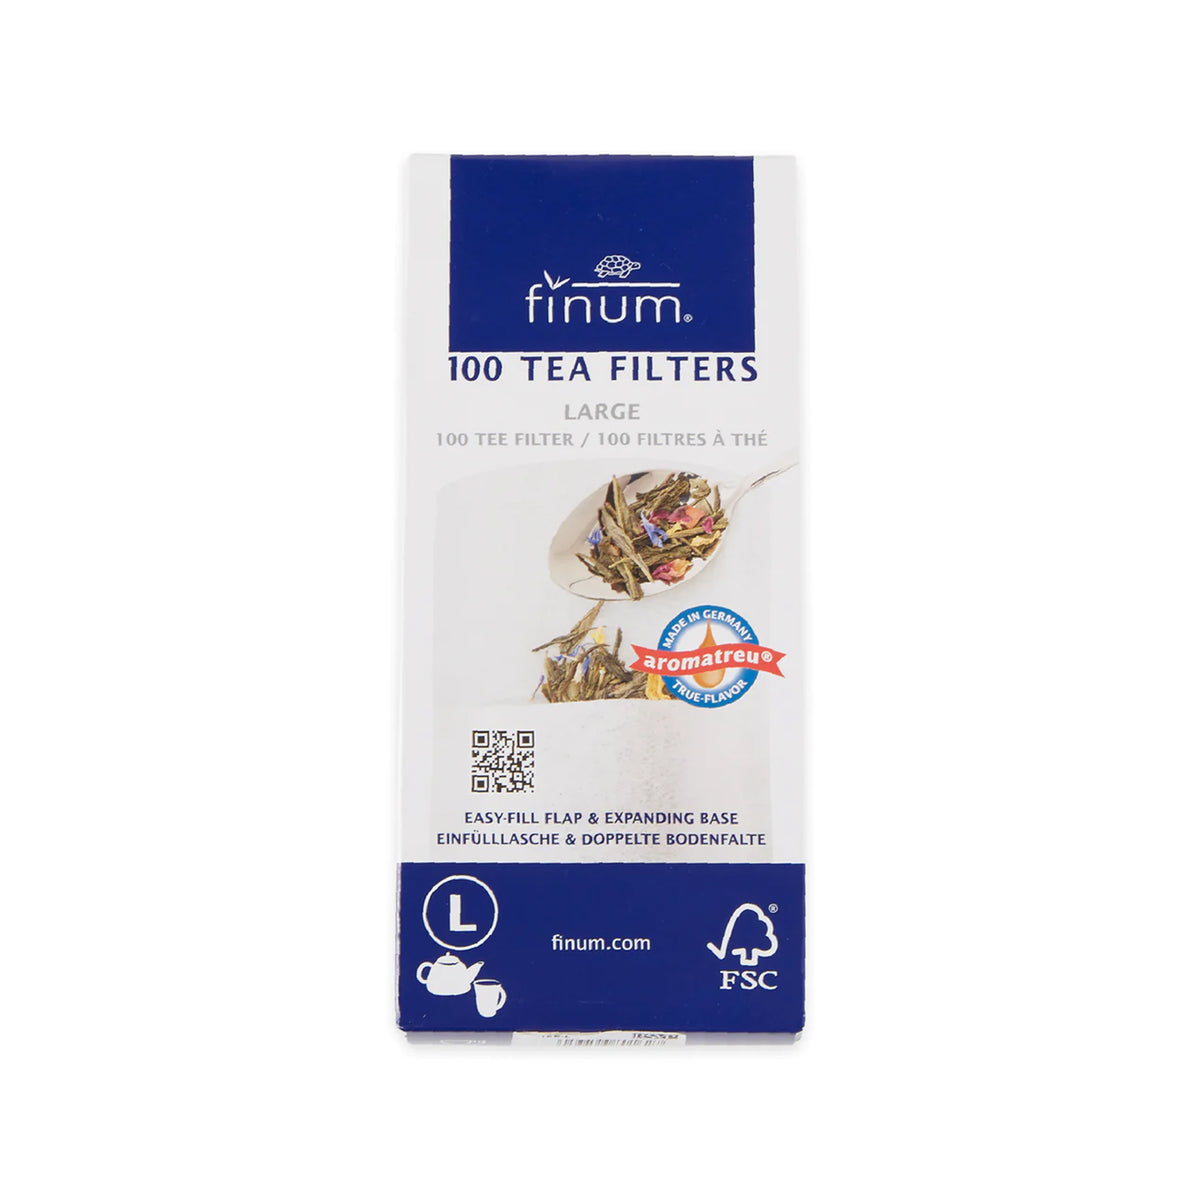 Large Tea Filters Boxed Set of 100 from Caskata.